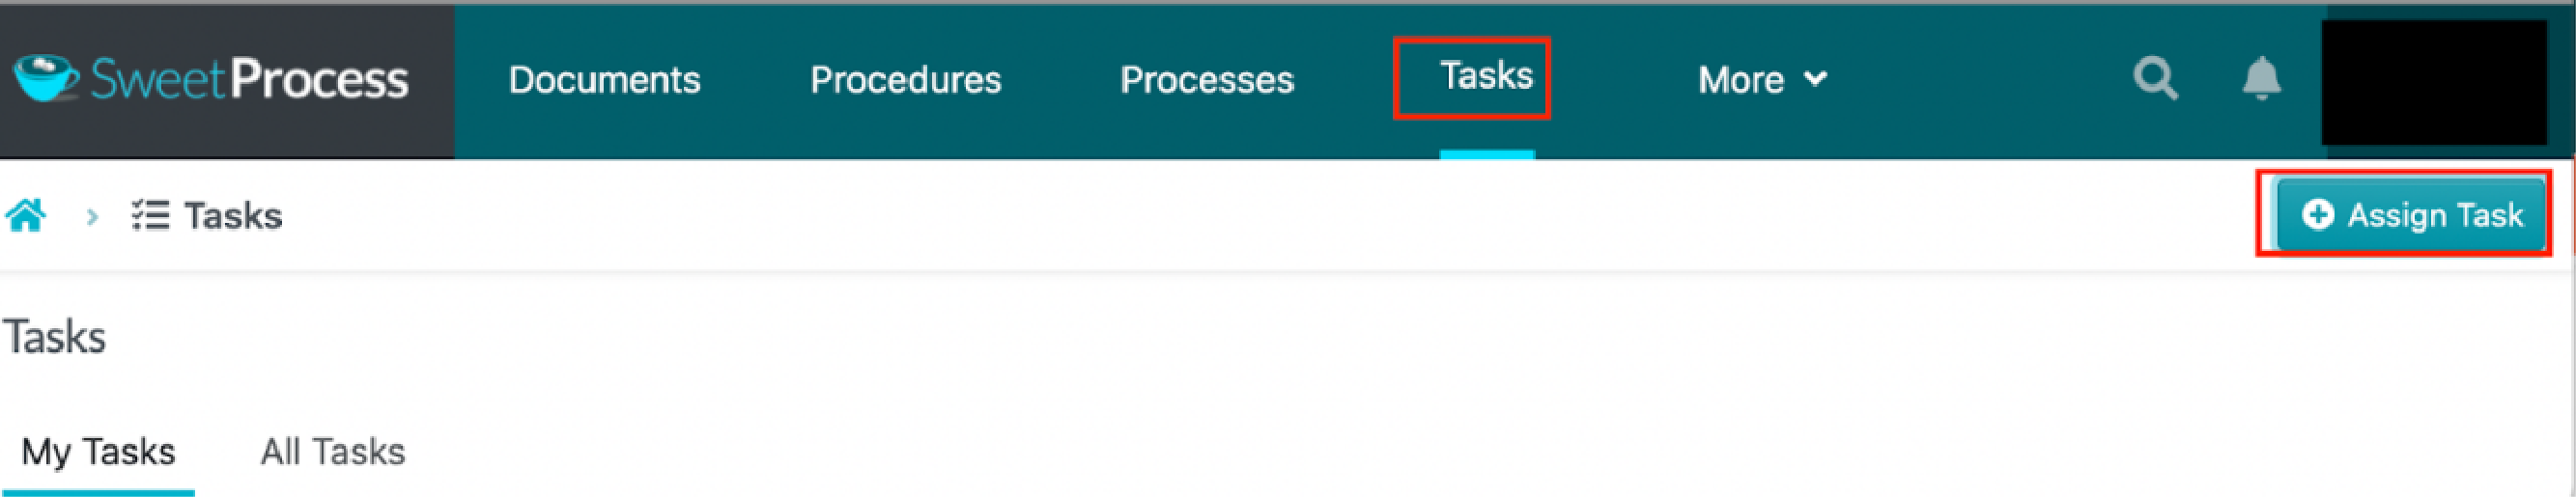 click the “Tasks” button and select “Assign Tasks.”